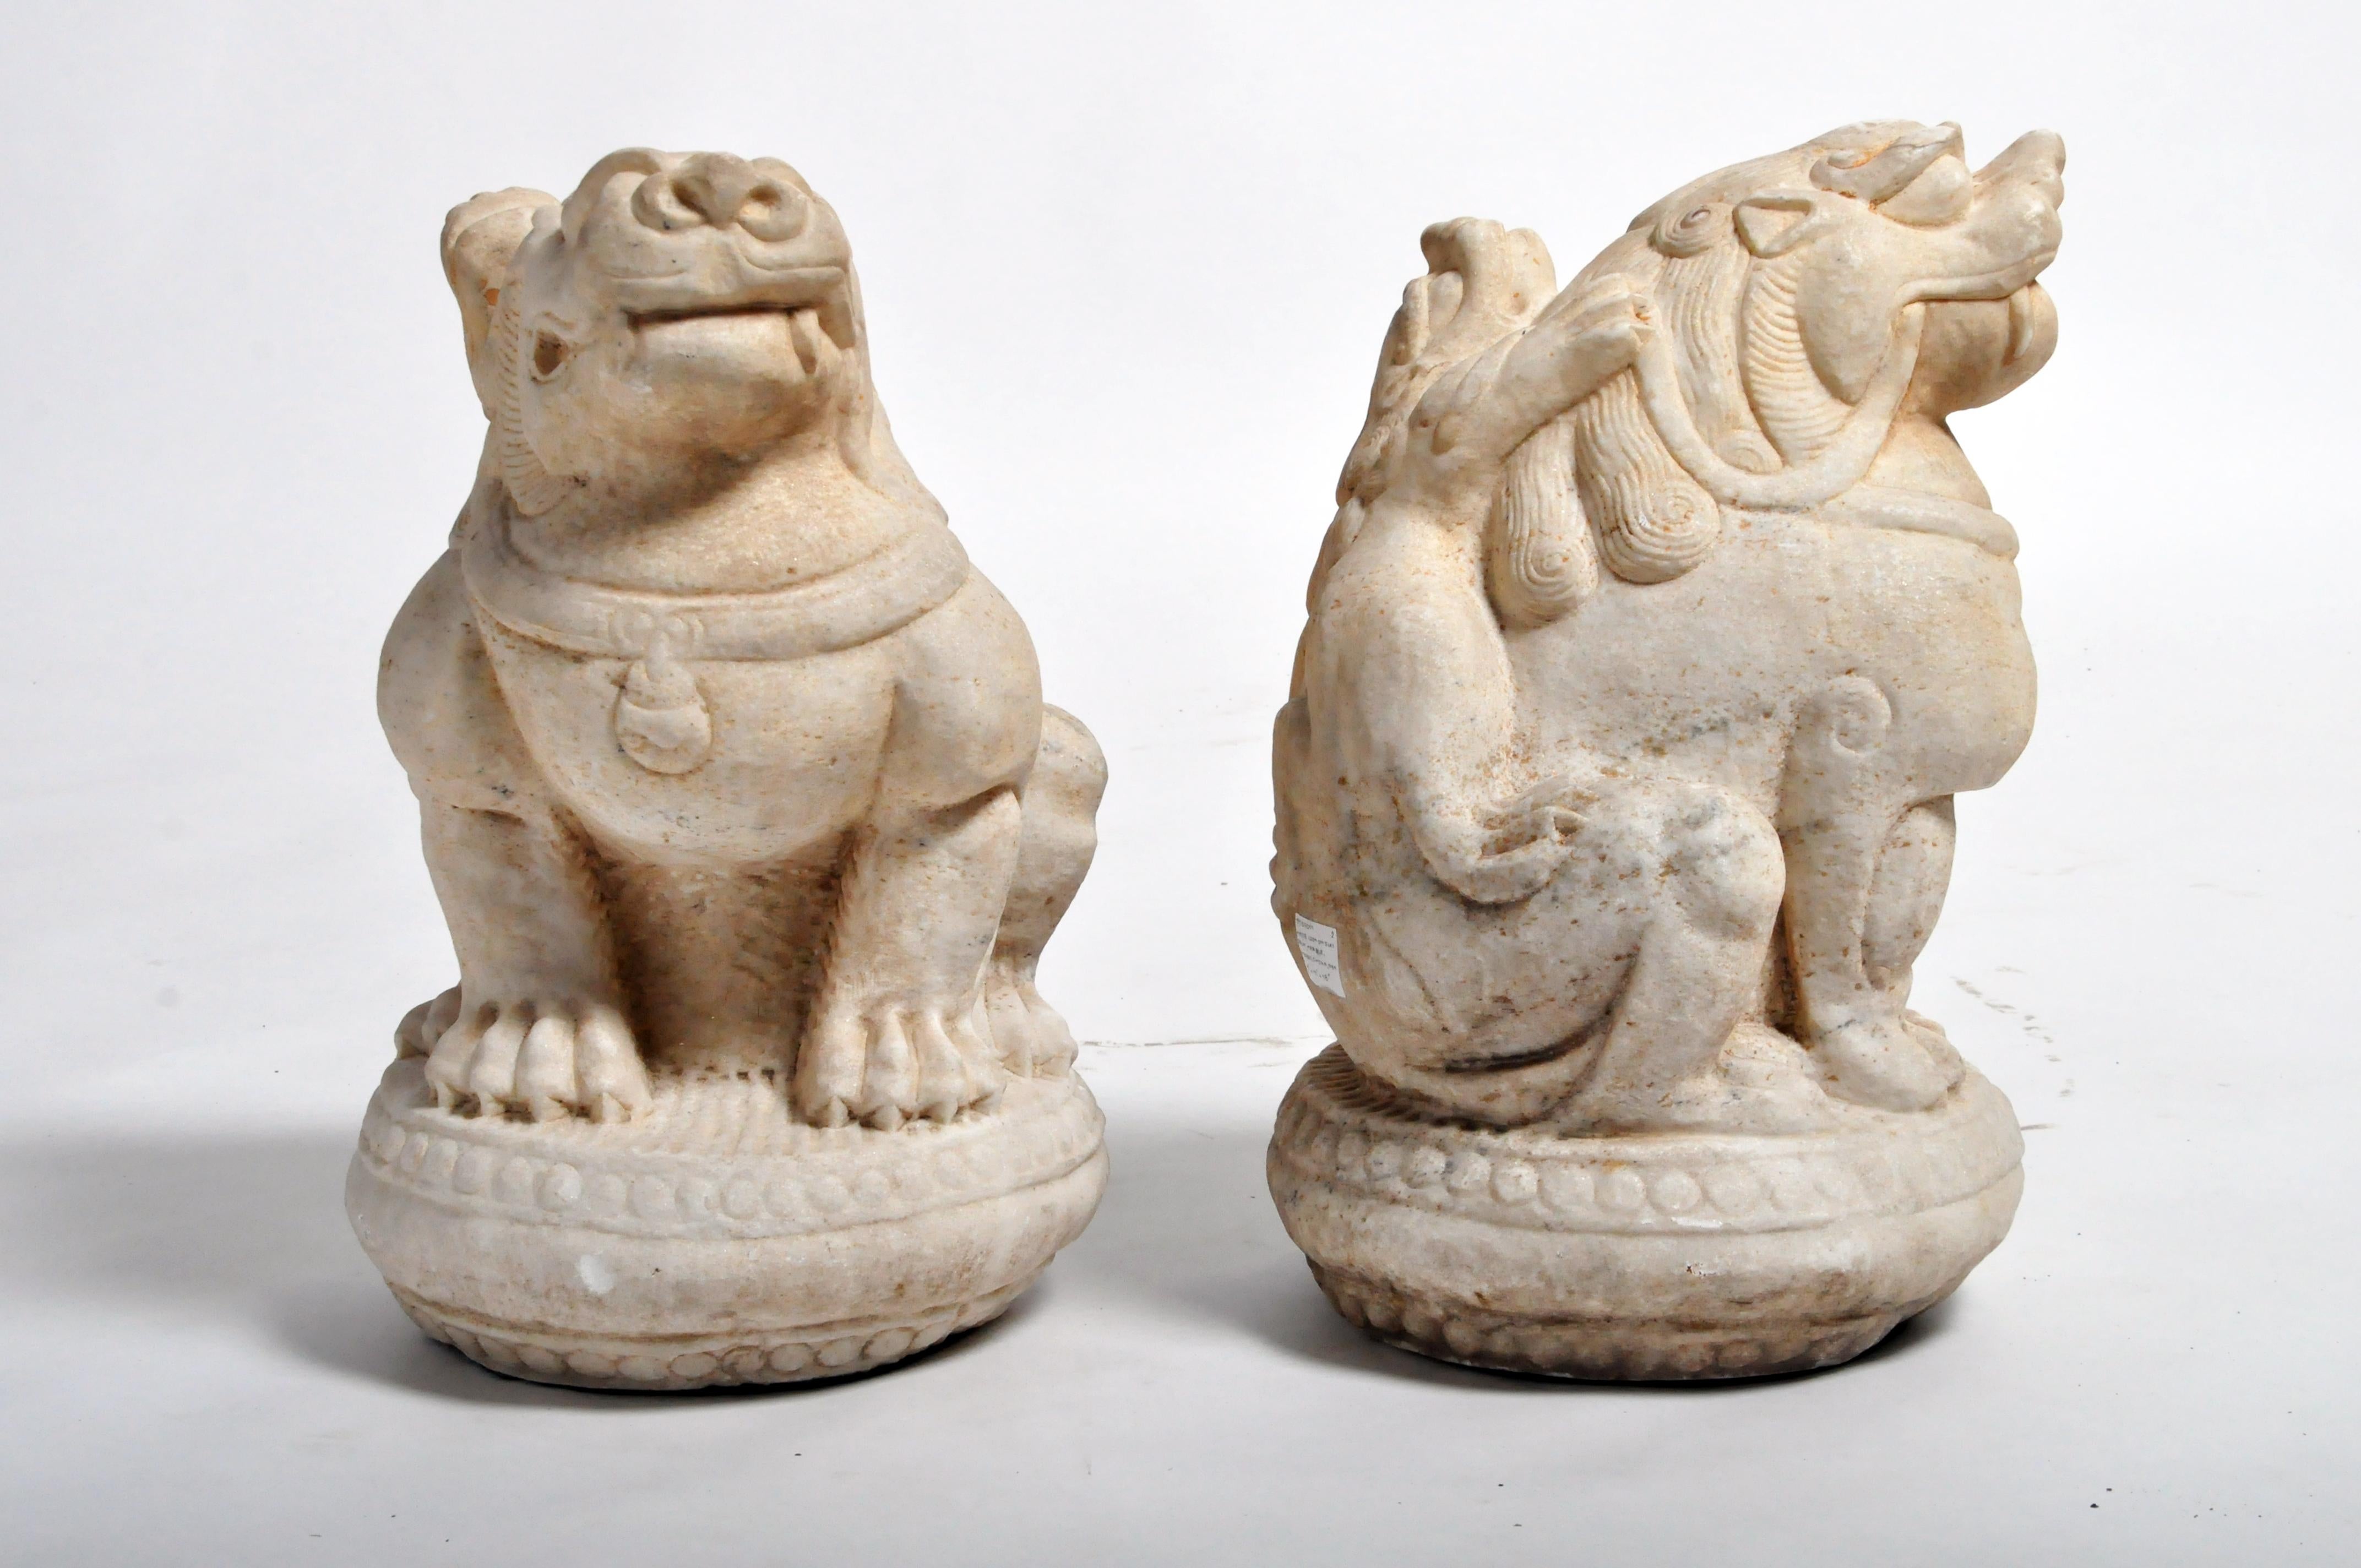 Often referred to as “Foo Dogs” or “Fu Dogs” in western culture, these handsome stone sentinels are iconic gatekeepers seen throughout Asia. Traditional symbols of protection, they are made from durable materials like bronze, stone, or marble and